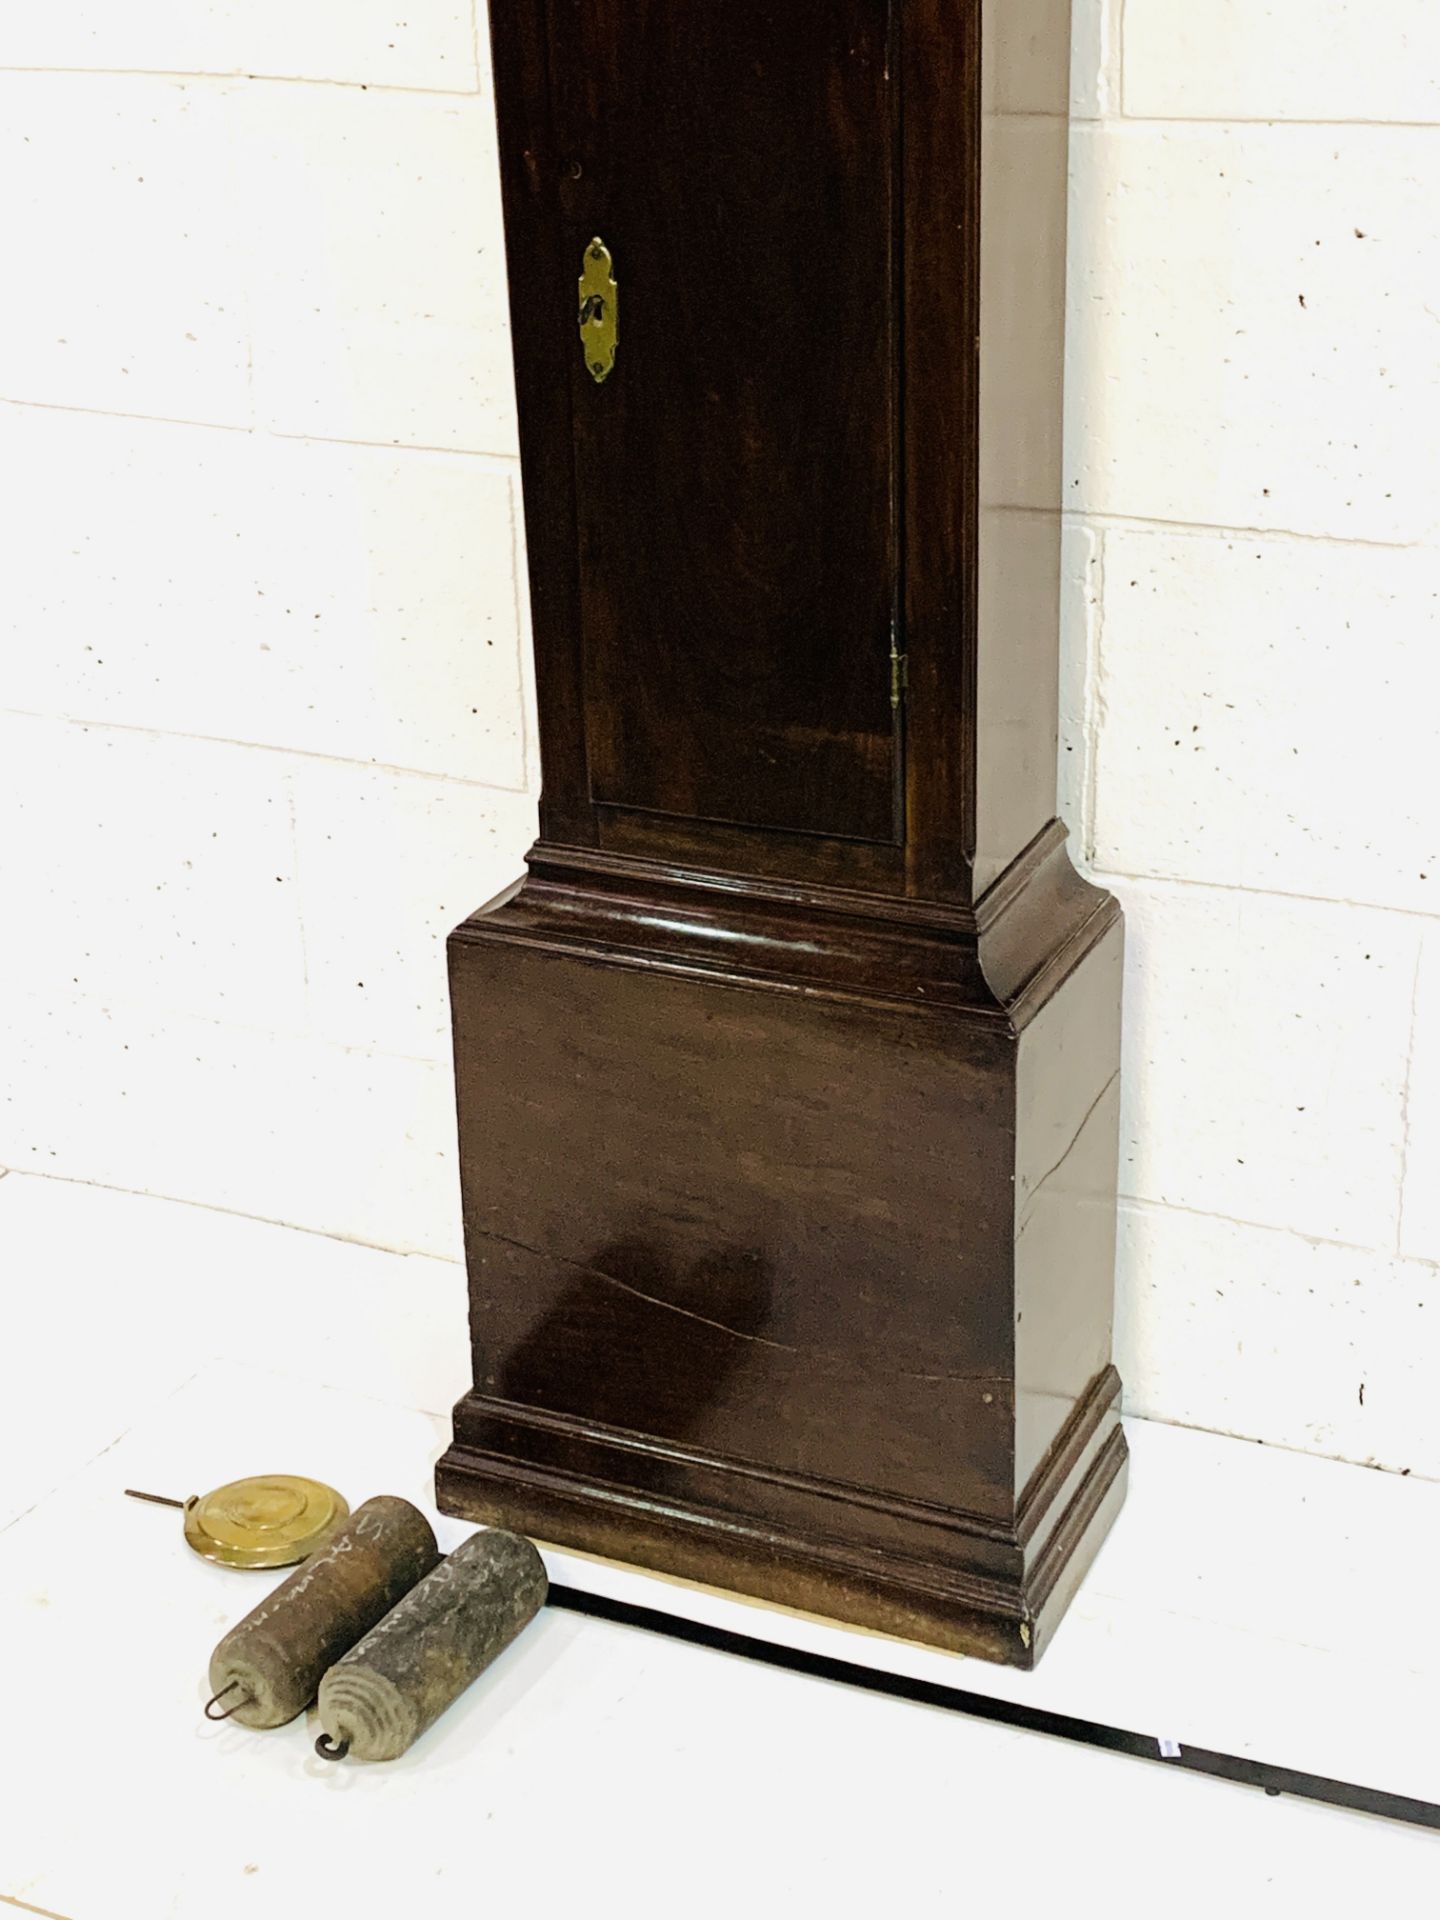 Mahogany long case clock with columned and arched hood by Jos. Leyton of Portsmouth - Image 9 of 9